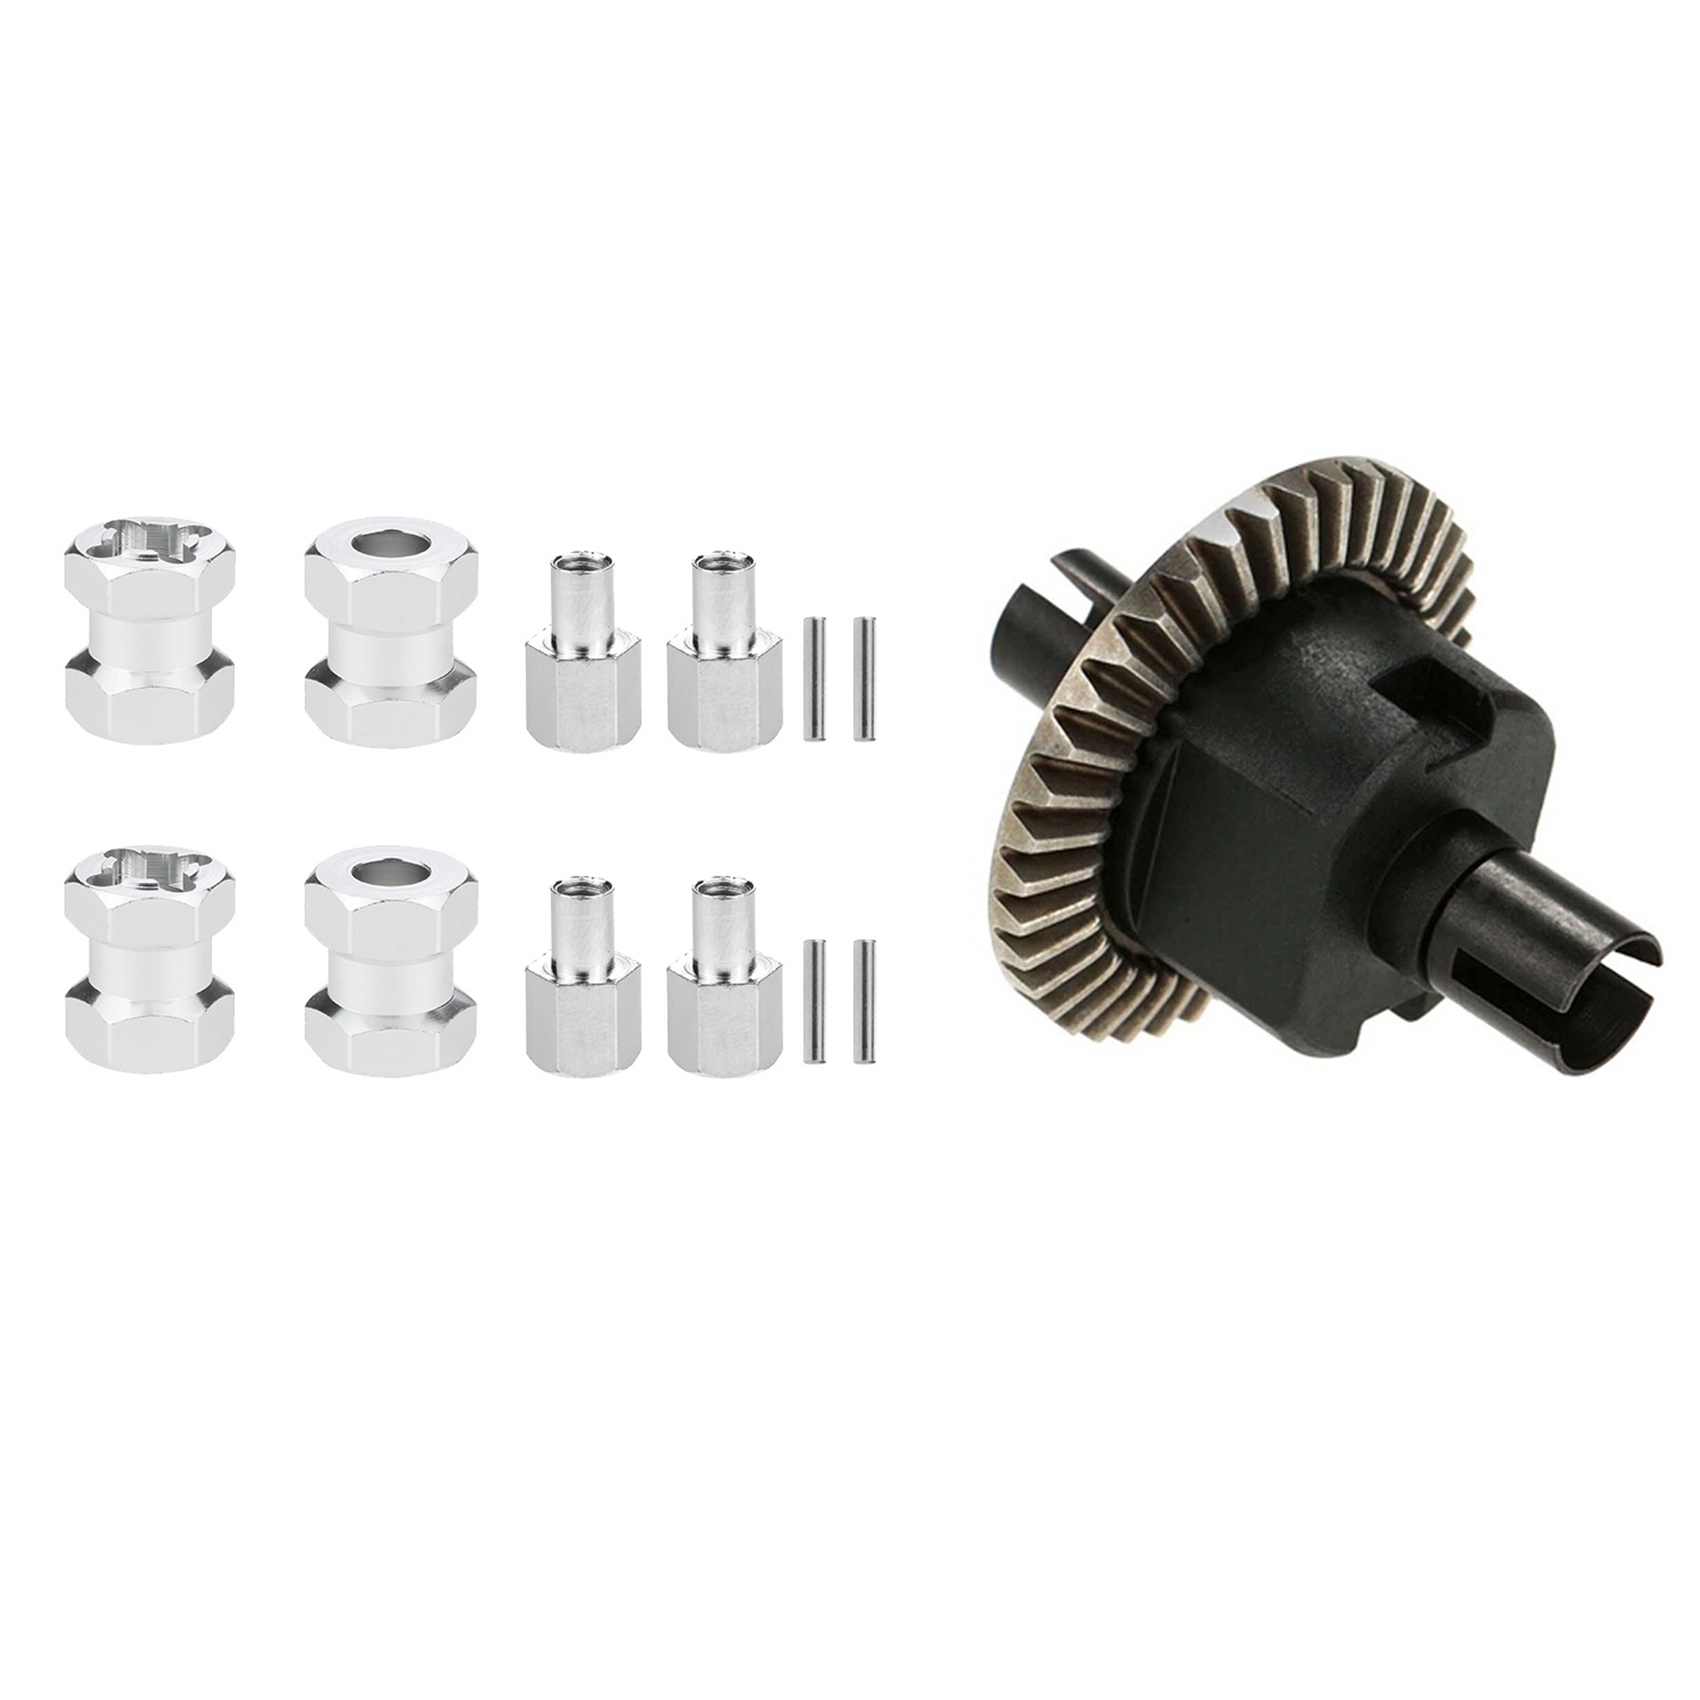 Gear Differential Set 02024 for HSP 94102 94123 94188 & 12mm Wheel Hex Hub 15mm Extension Coupler for AXIAL SCX10 D90